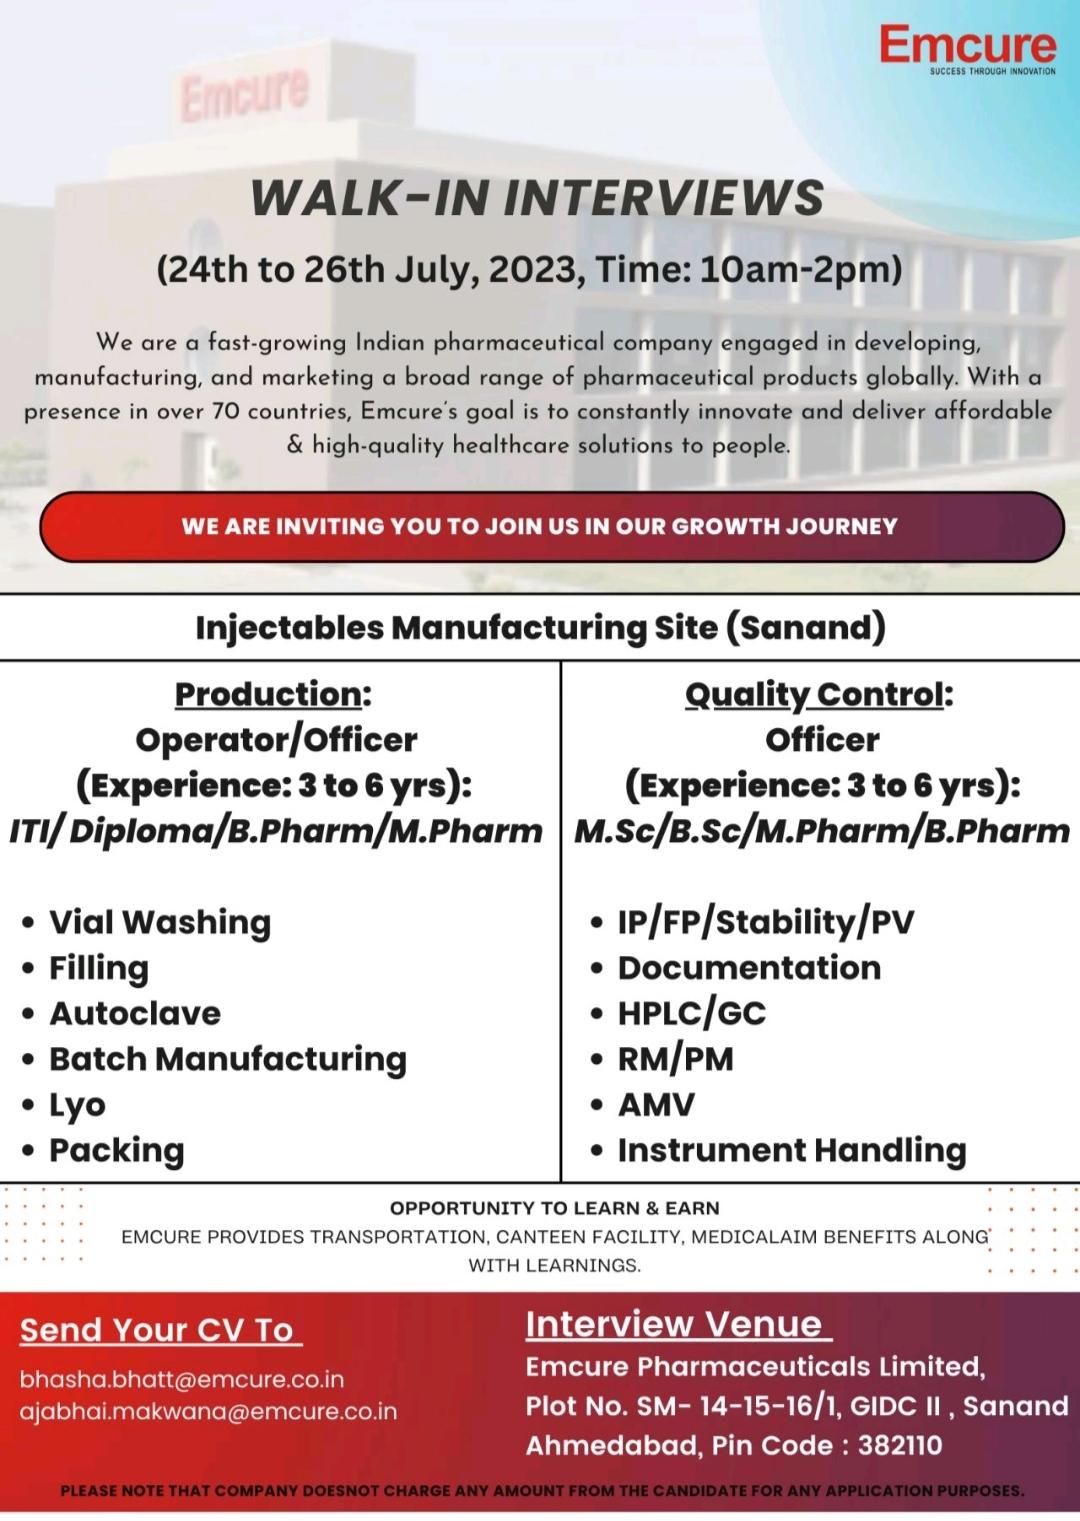 Emcure Pharmaceuticals - Walk-In drive at Sanand plant from 24th Jul ...